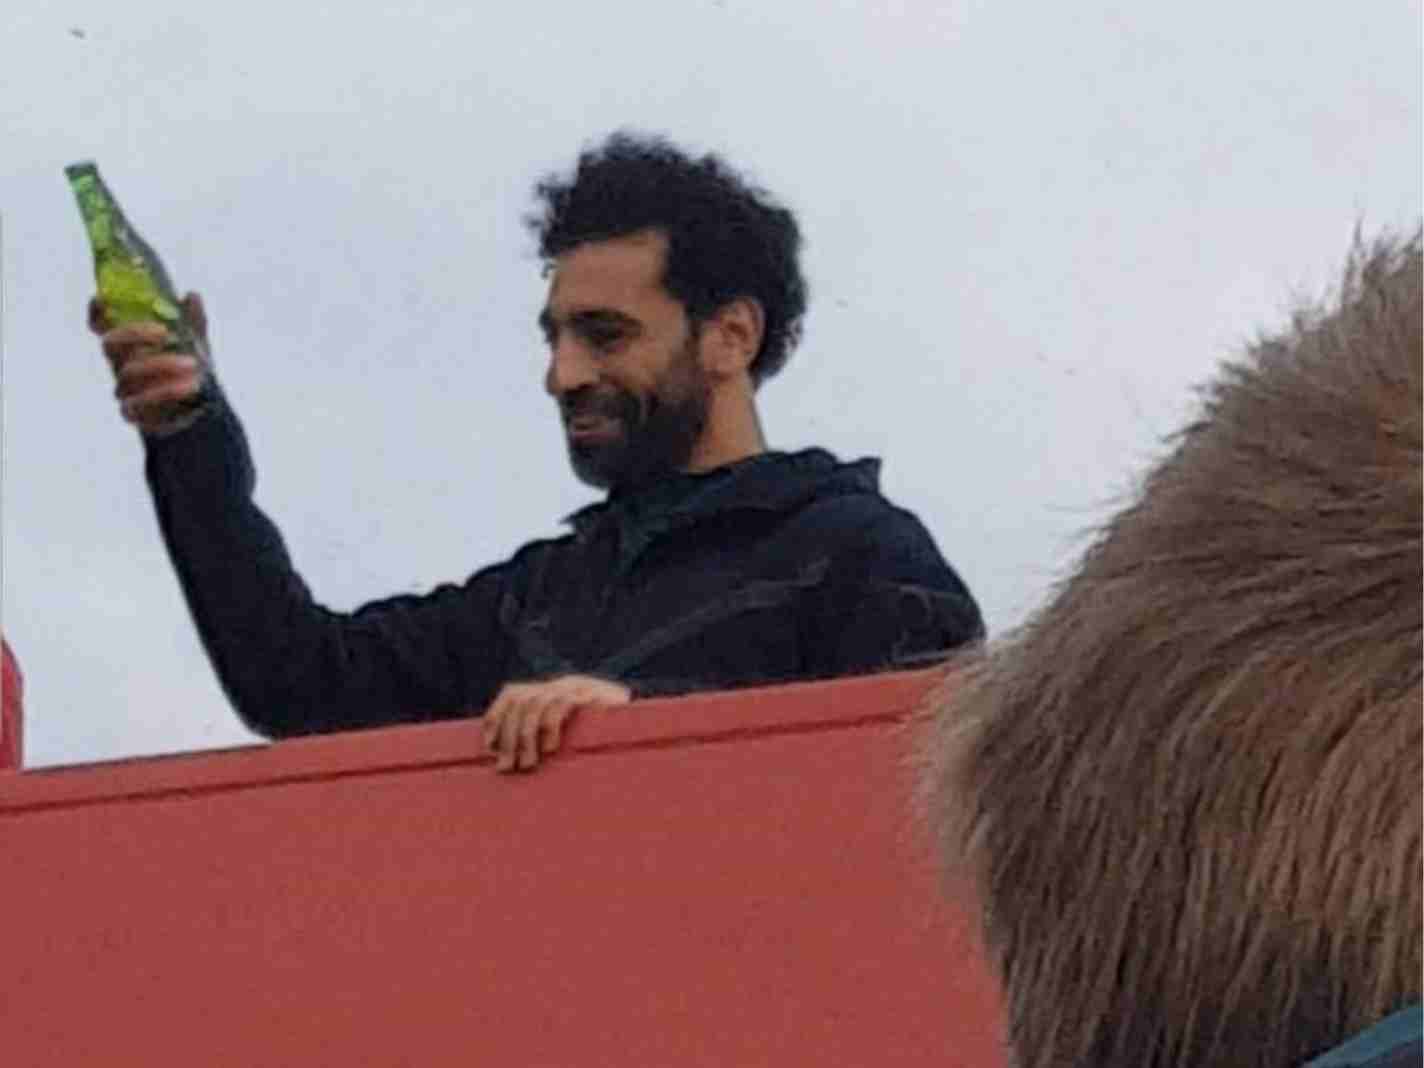 Was Mo Salah really drinking beer during LFC bus parade? Here’s the truth